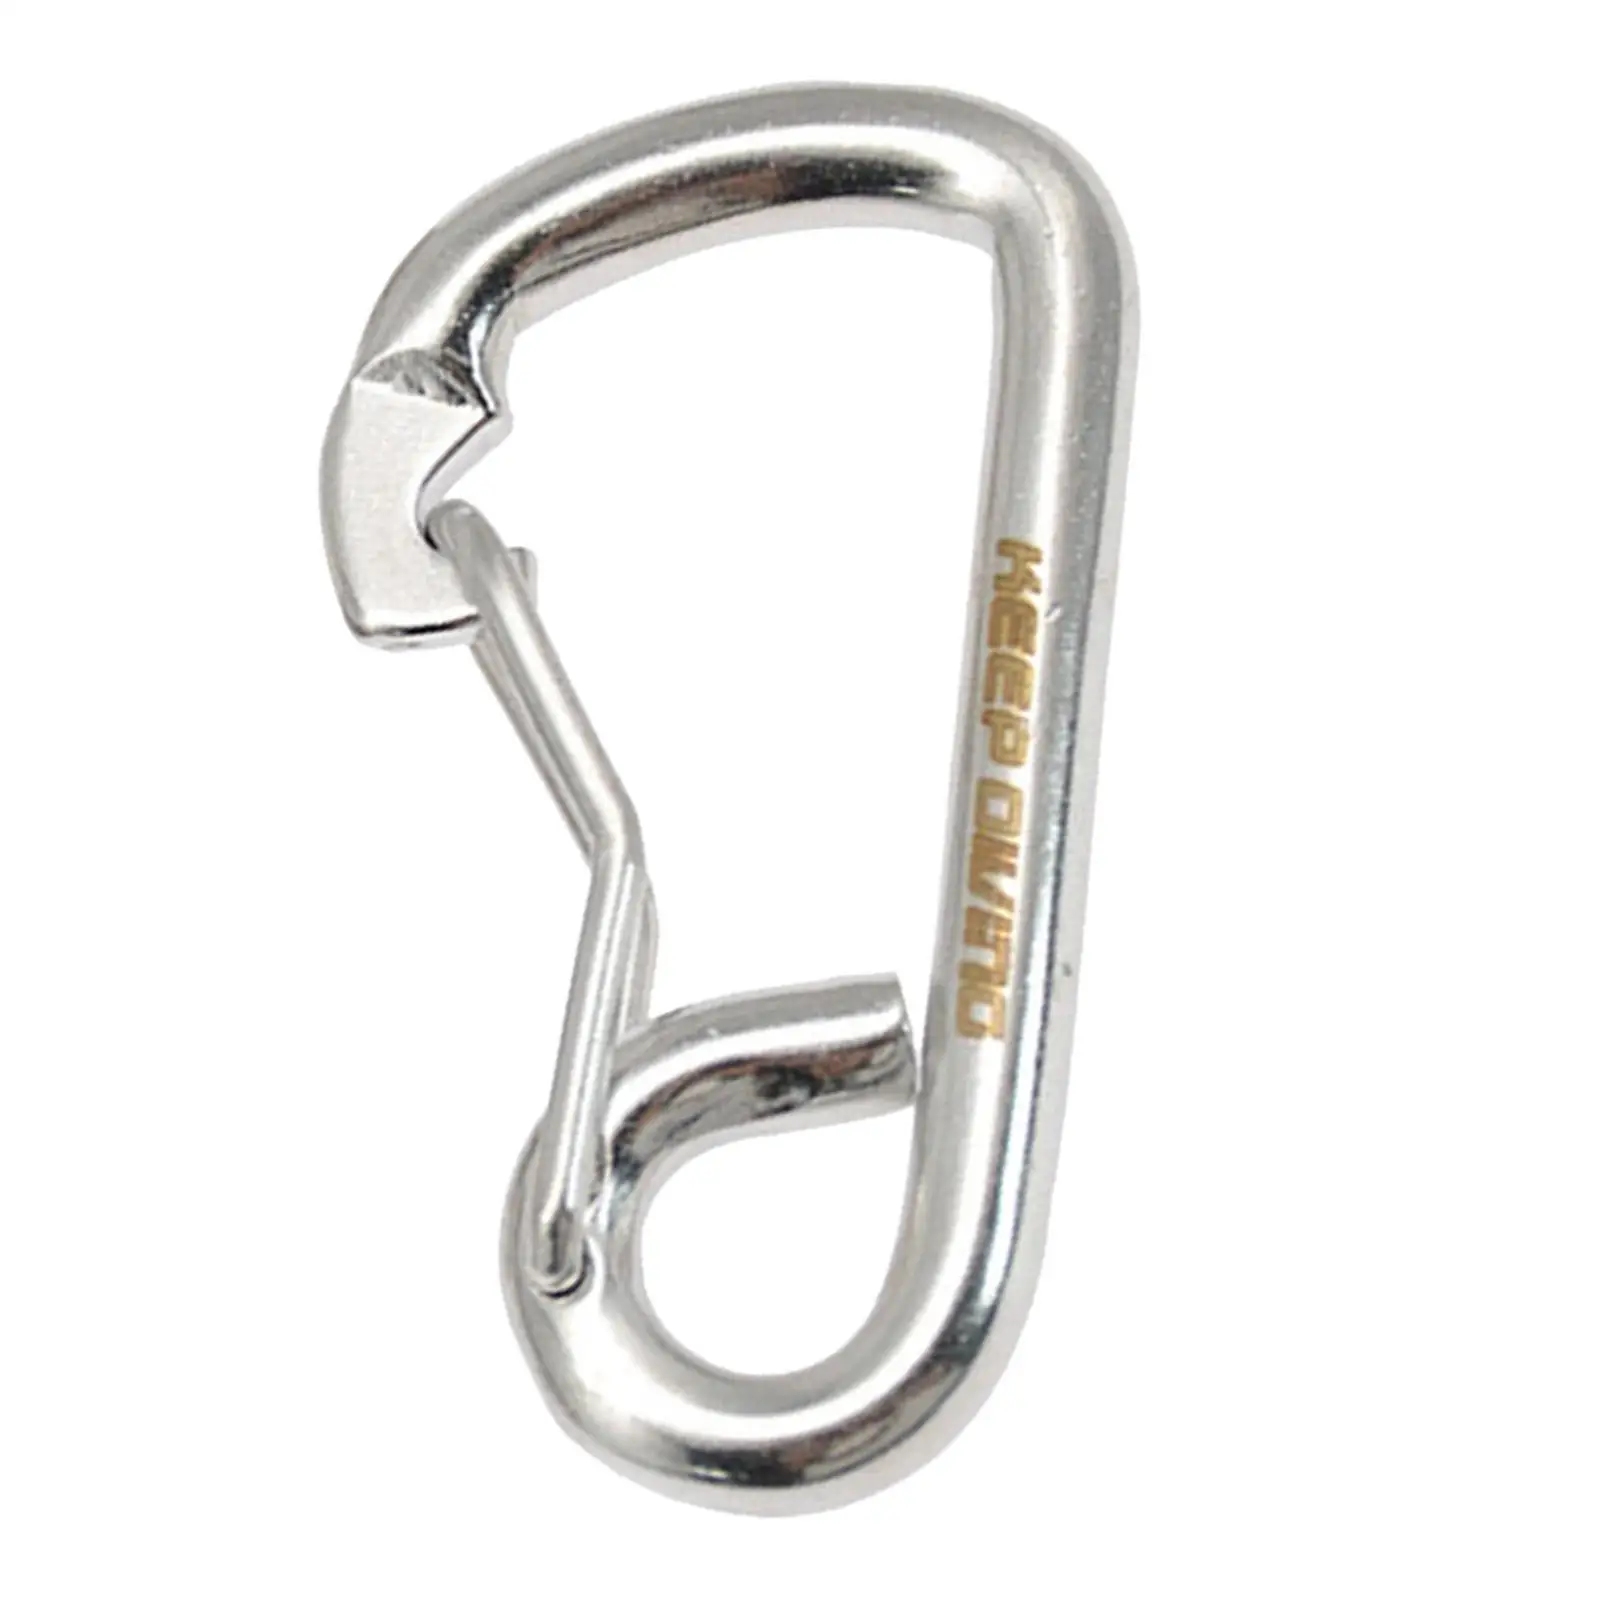 Diving Snap Hooks Scuba Diving Buckle Carabiner Quick Link Spring Hooks Key Snap Clip for Cable Weight Belt Ropes Camping